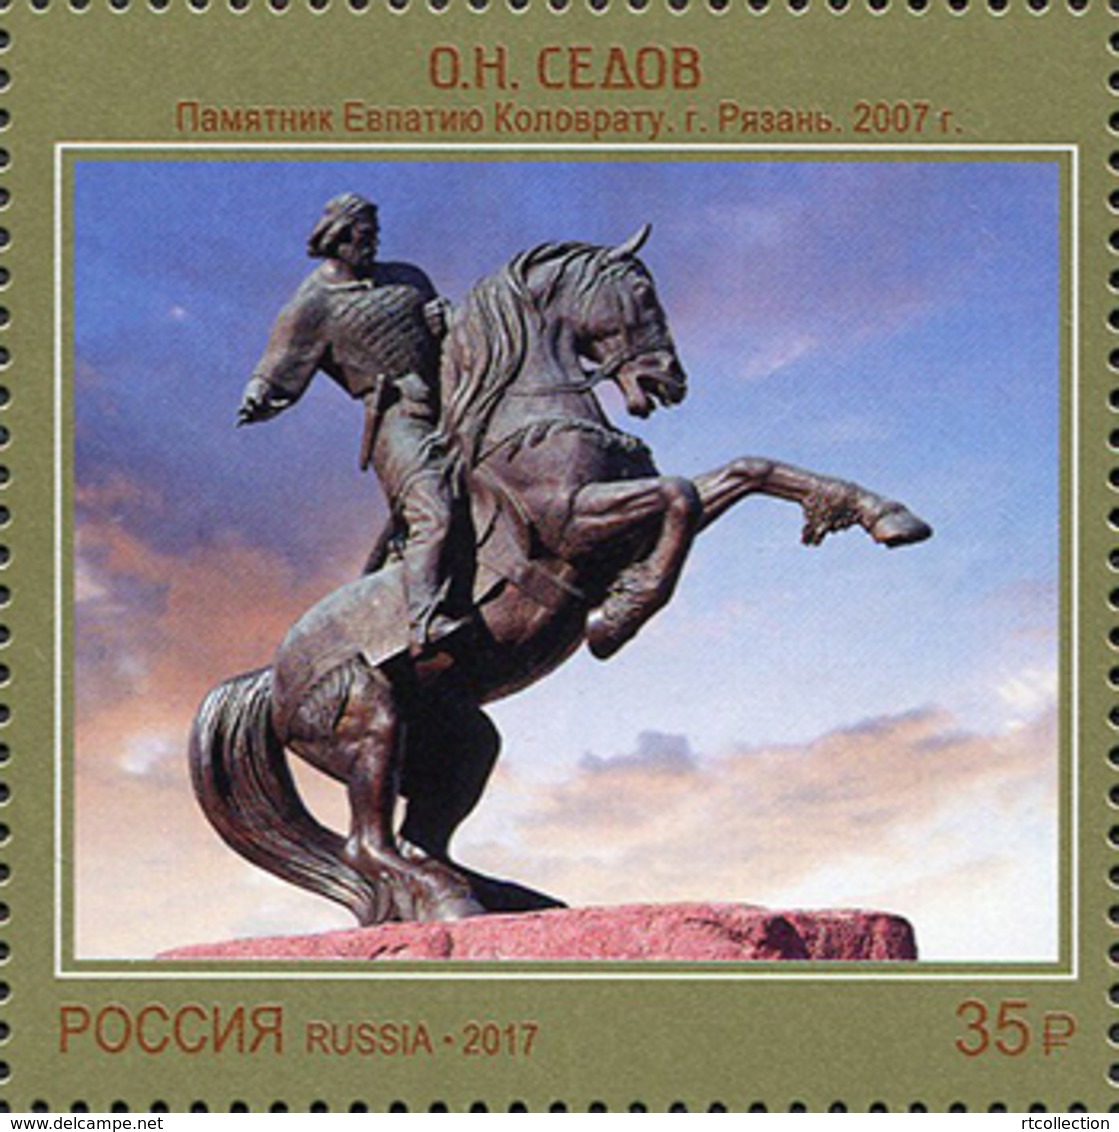 Russia 2017 - One Contemporary Russian Art Modern Sculpture Monument Evpaty Kolovrat Paintings Horse Riding Stamp MNH - Monuments